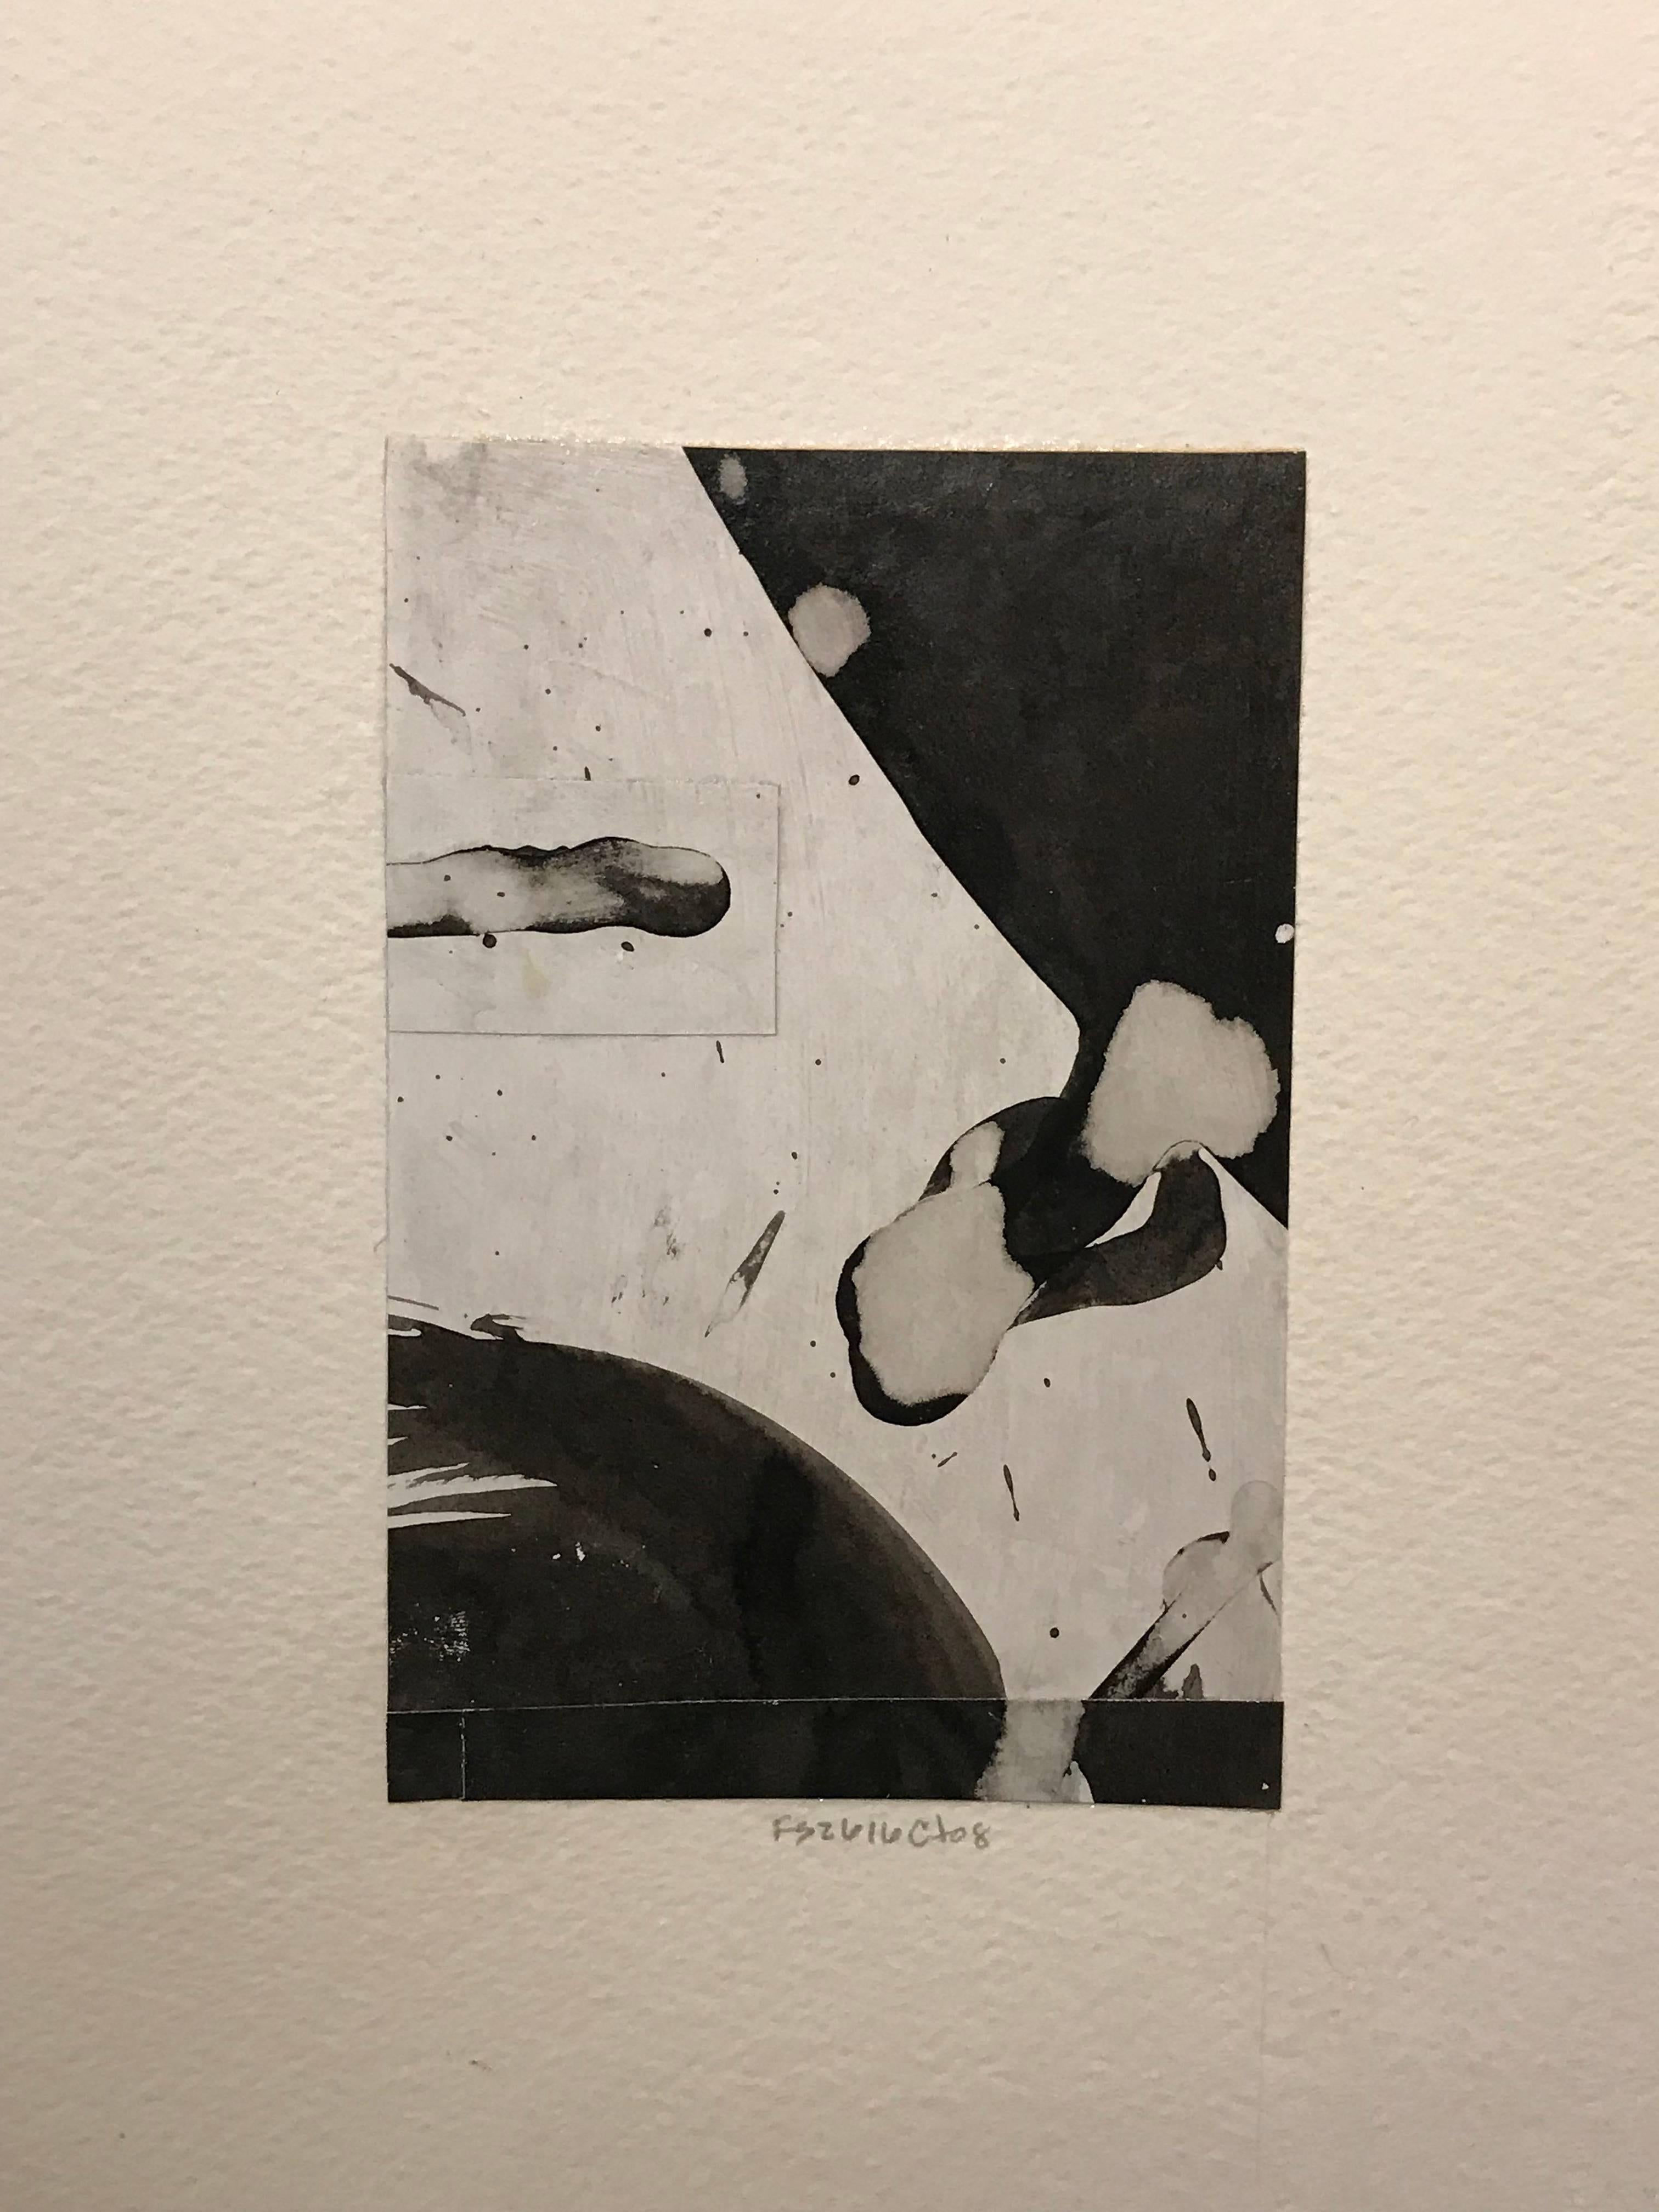 Small black and white collage on paper by Cecil Touchon. Touchon plays with  visual vocabulary in all of his work. This small work demonstrates his process and is wonderfully inky. 
Image: 6 x 4 inches
Paper: 11 x 9.5 inches
Cecil Touchon’s